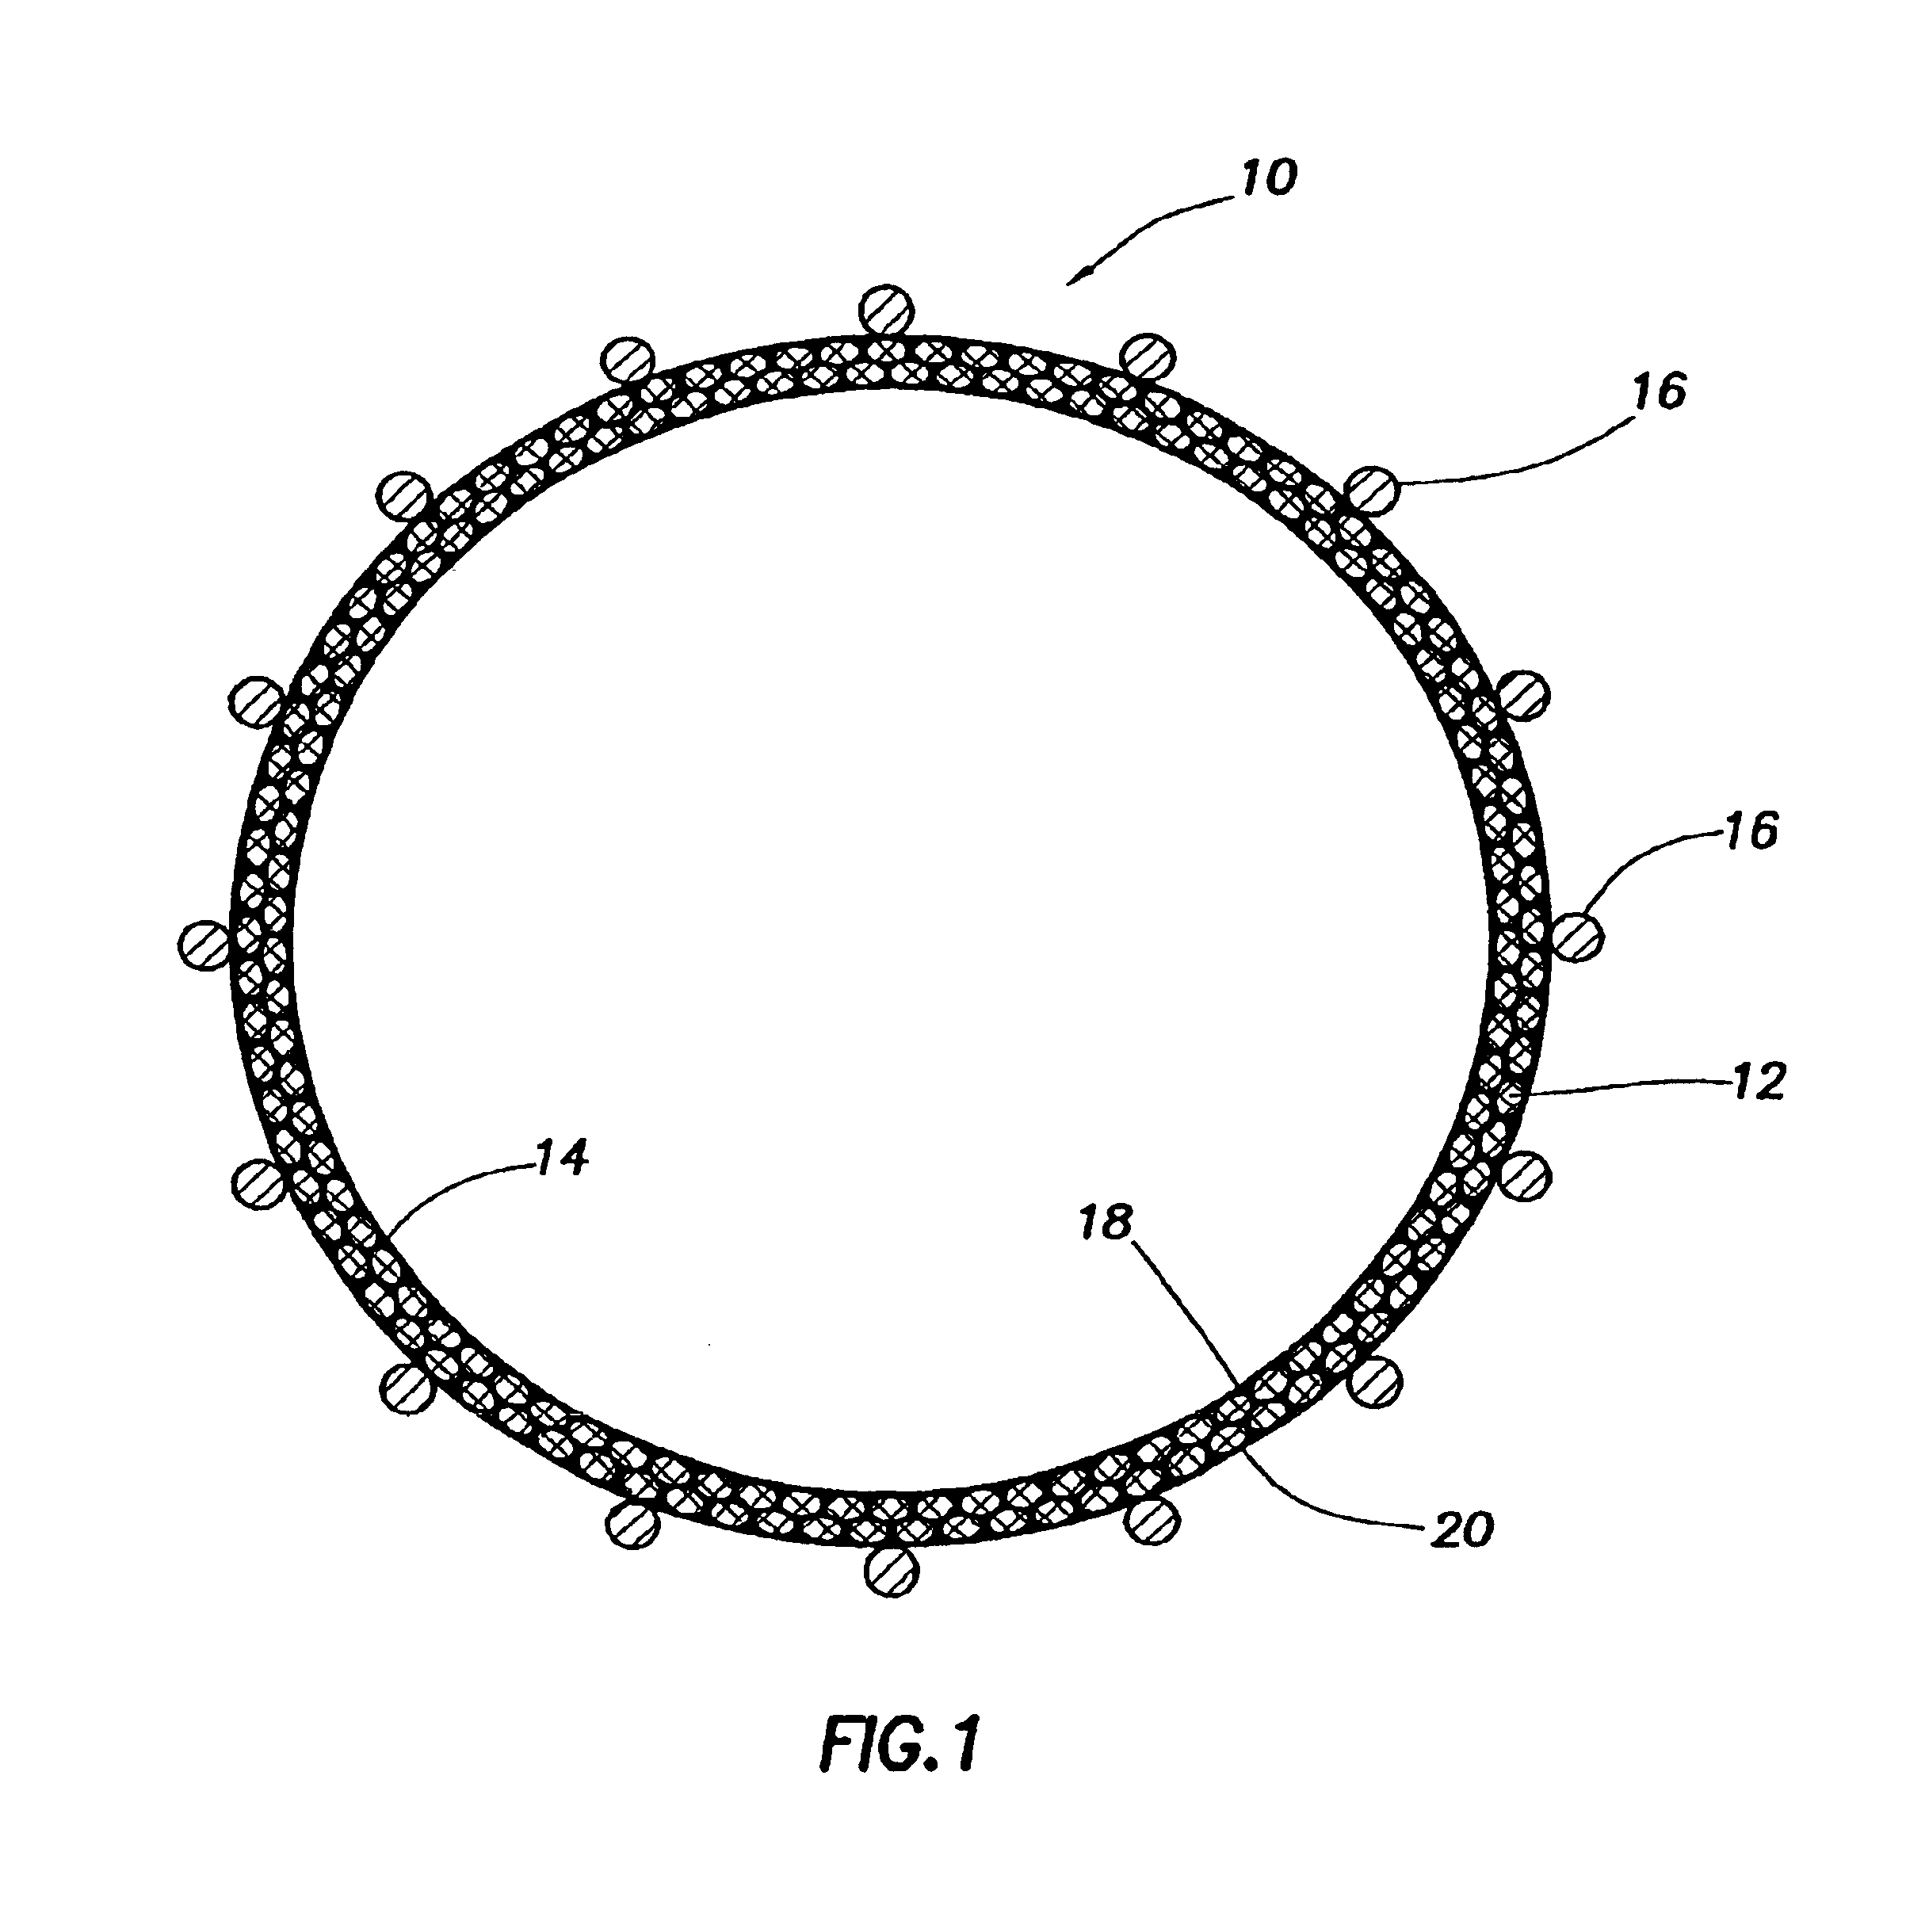 Coated vascular grafts and methods of use